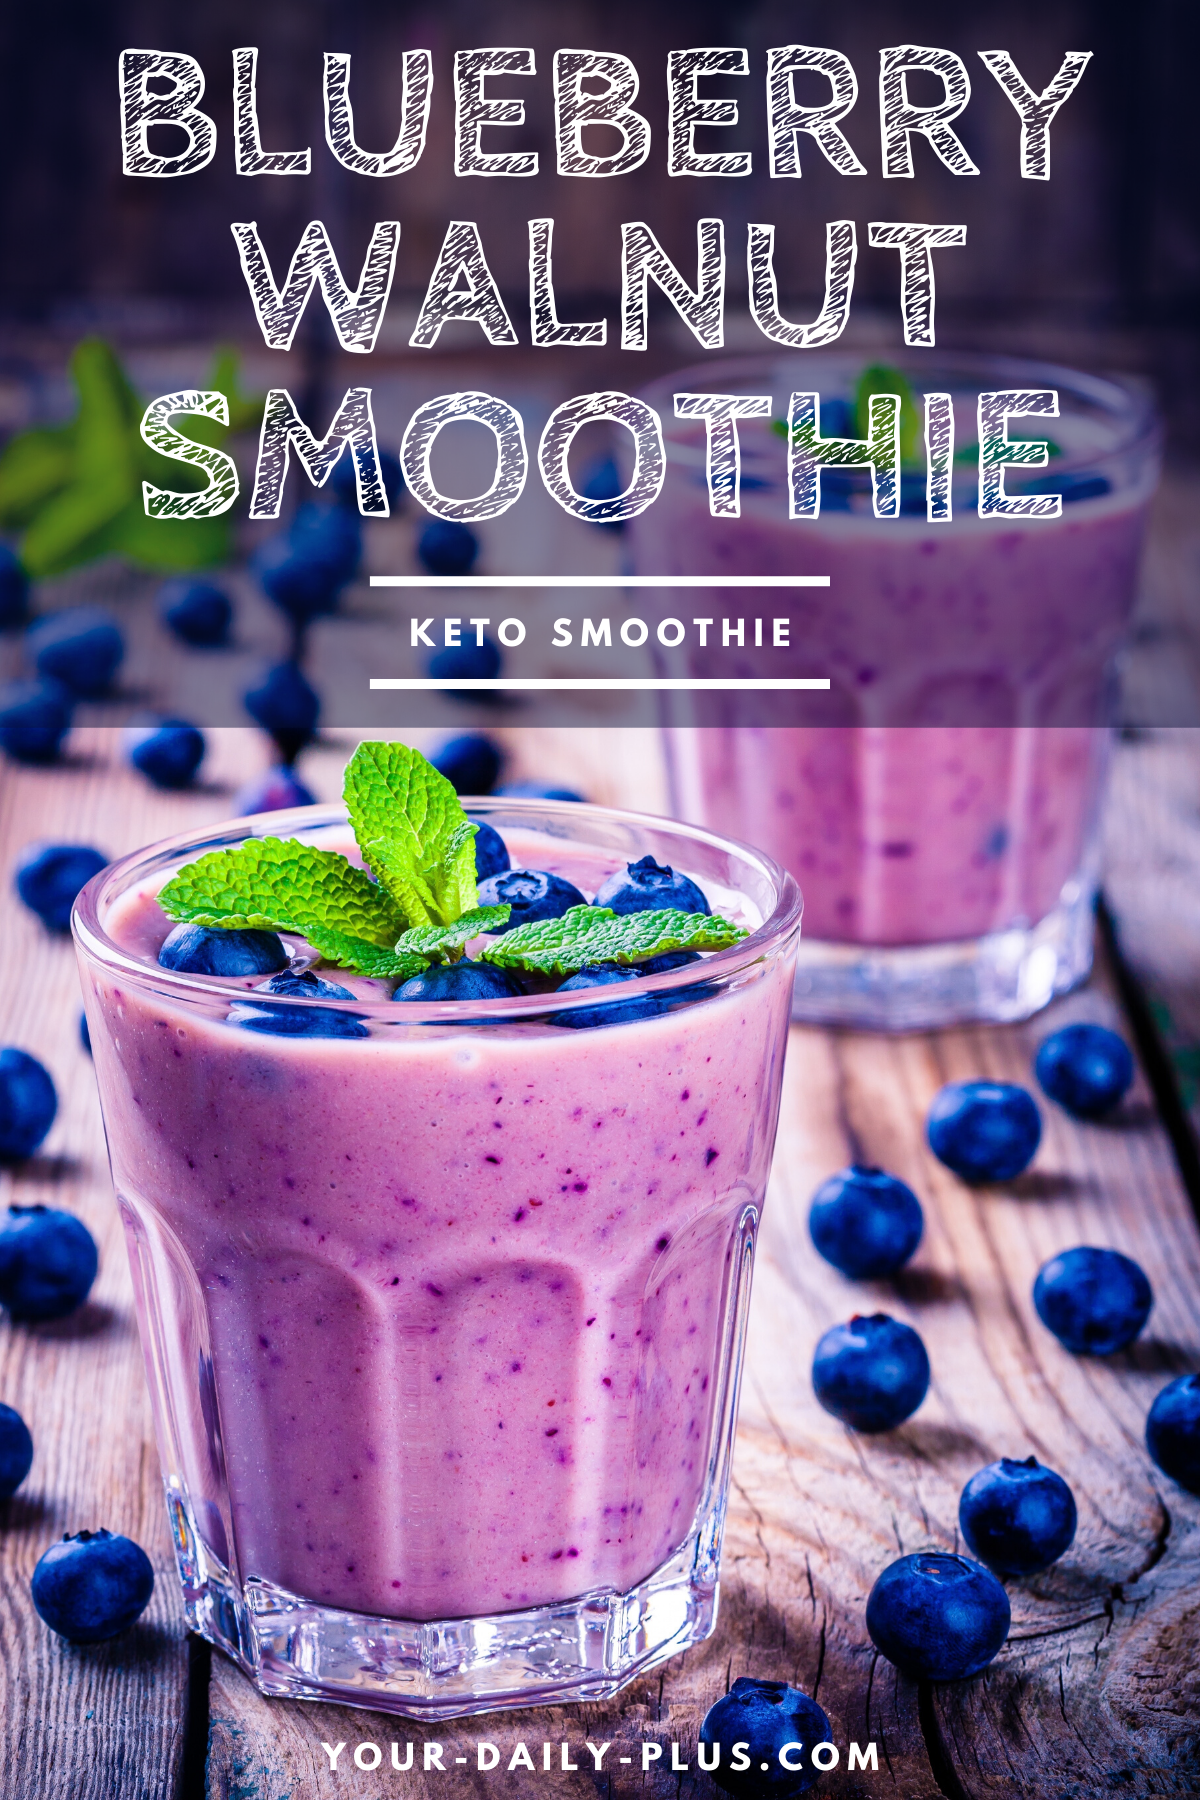 We’ve all surely heard of the magical anti-oxidant benefits of blueberries and so enjoying them first thing in the morning is a great way to start your waking mind. #smoothies #ketodiet #lowcarbdiet #ketogenic